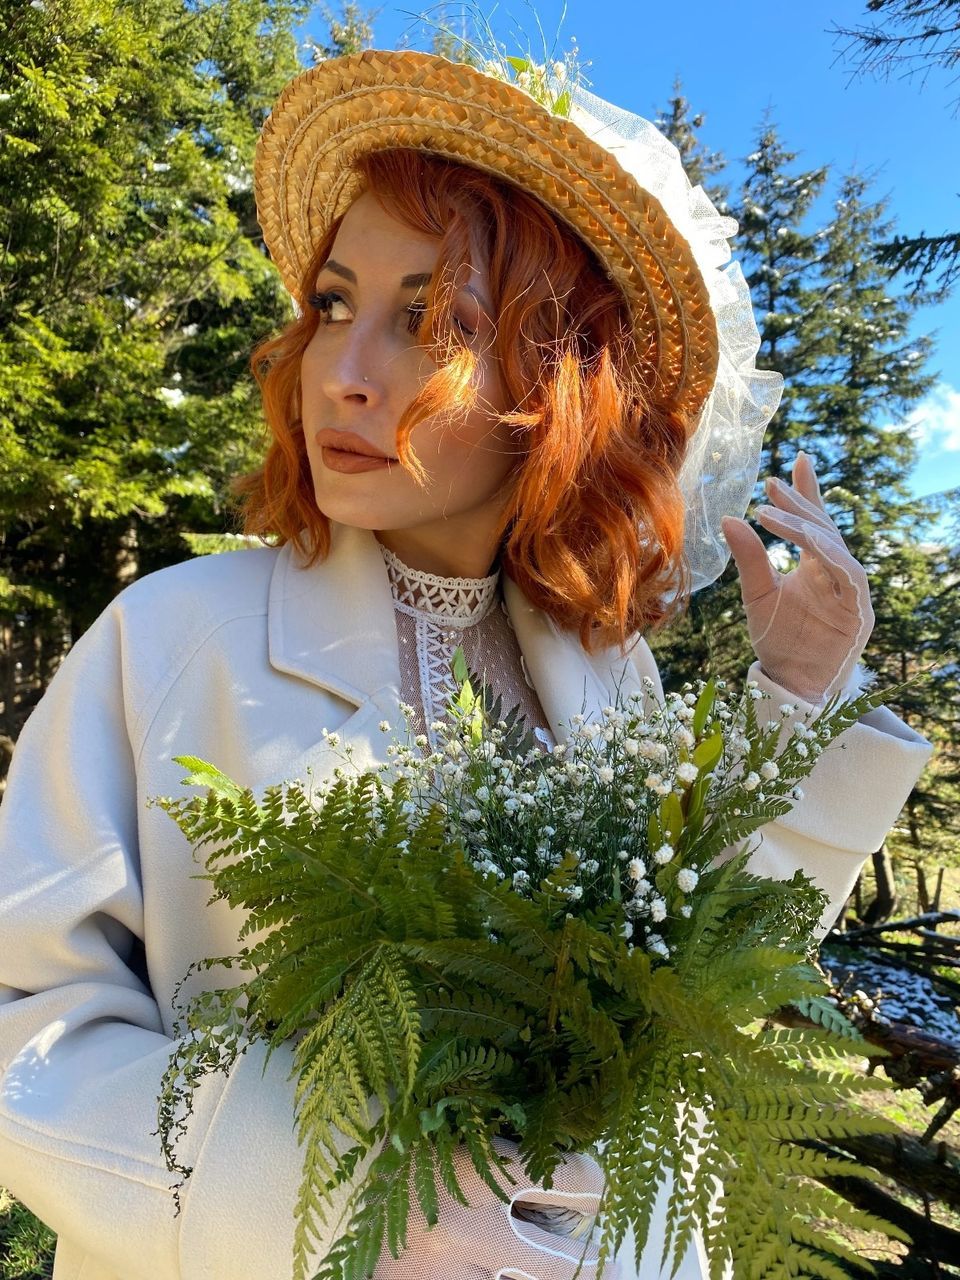 plant, one person, nature, flower, women, tree, clothing, hat, adult, young adult, portrait, day, leisure activity, lifestyles, looking, spring, growth, sunlight, front view, outdoors, female, waist up, standing, sun hat, green, hairstyle, fashion, casual clothing, sky, beauty in nature, person, holding, looking away, redhead, child, long hair, leaf